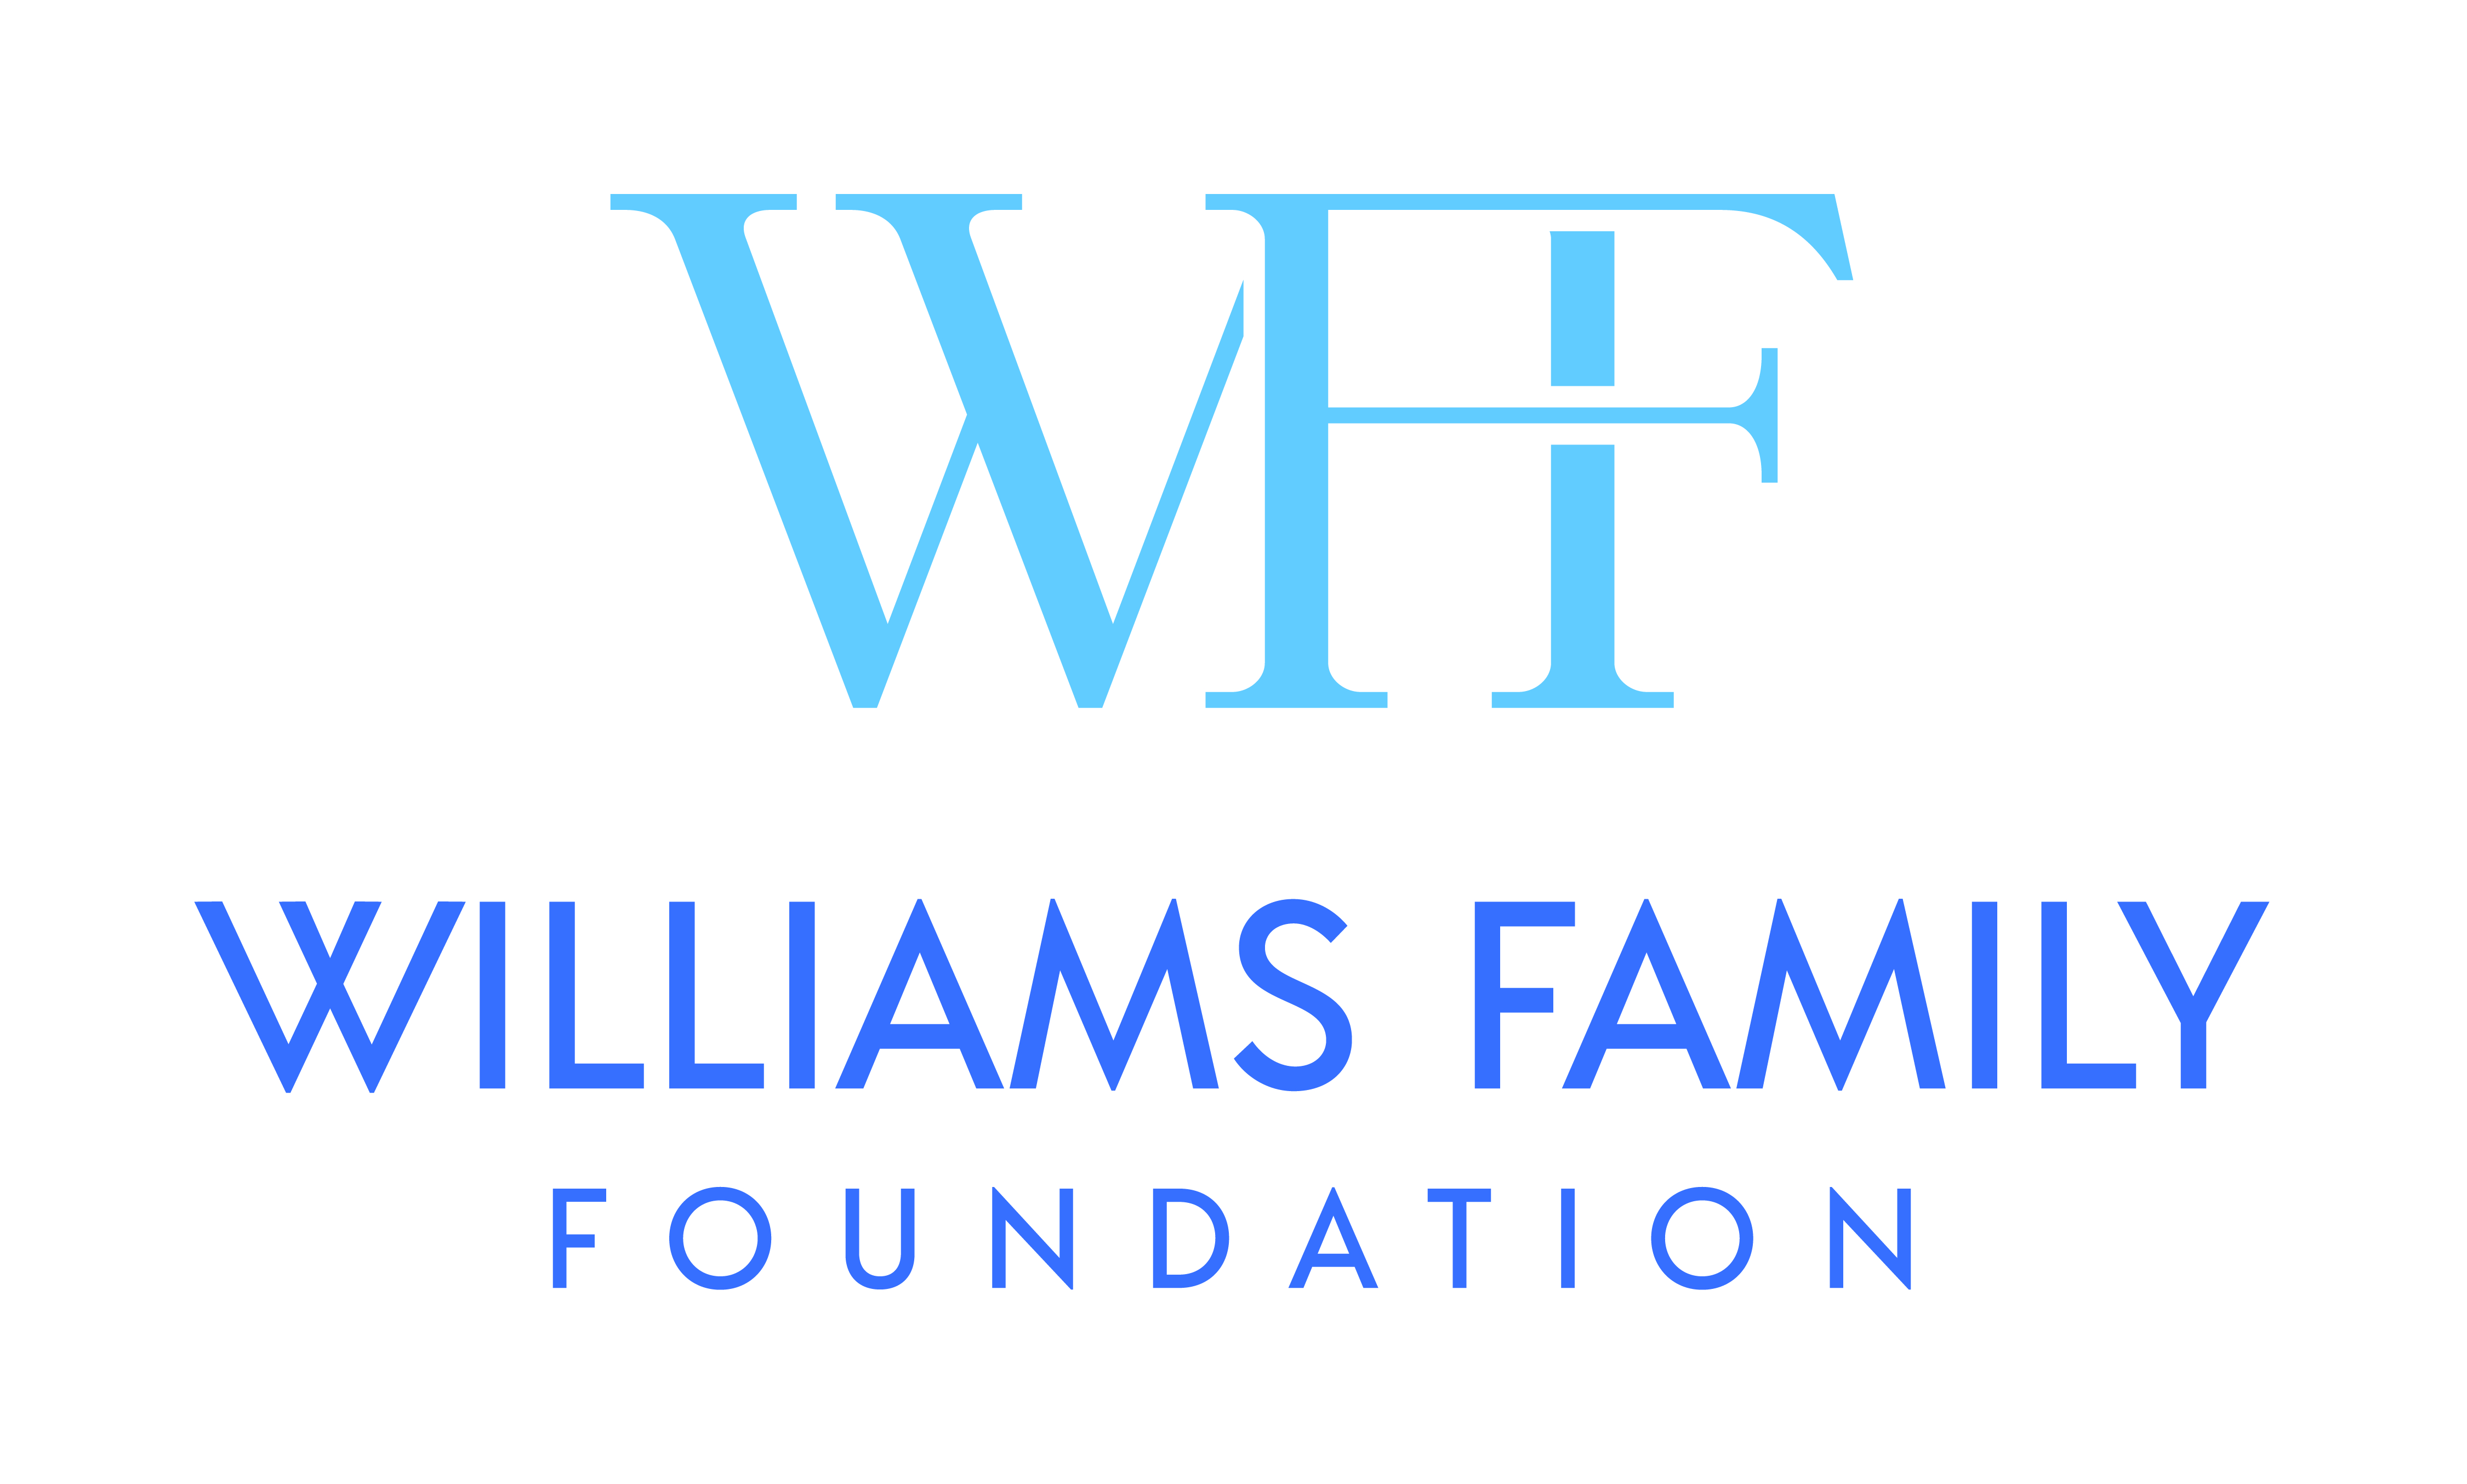 A. Williams Family Foundation (Presenting)